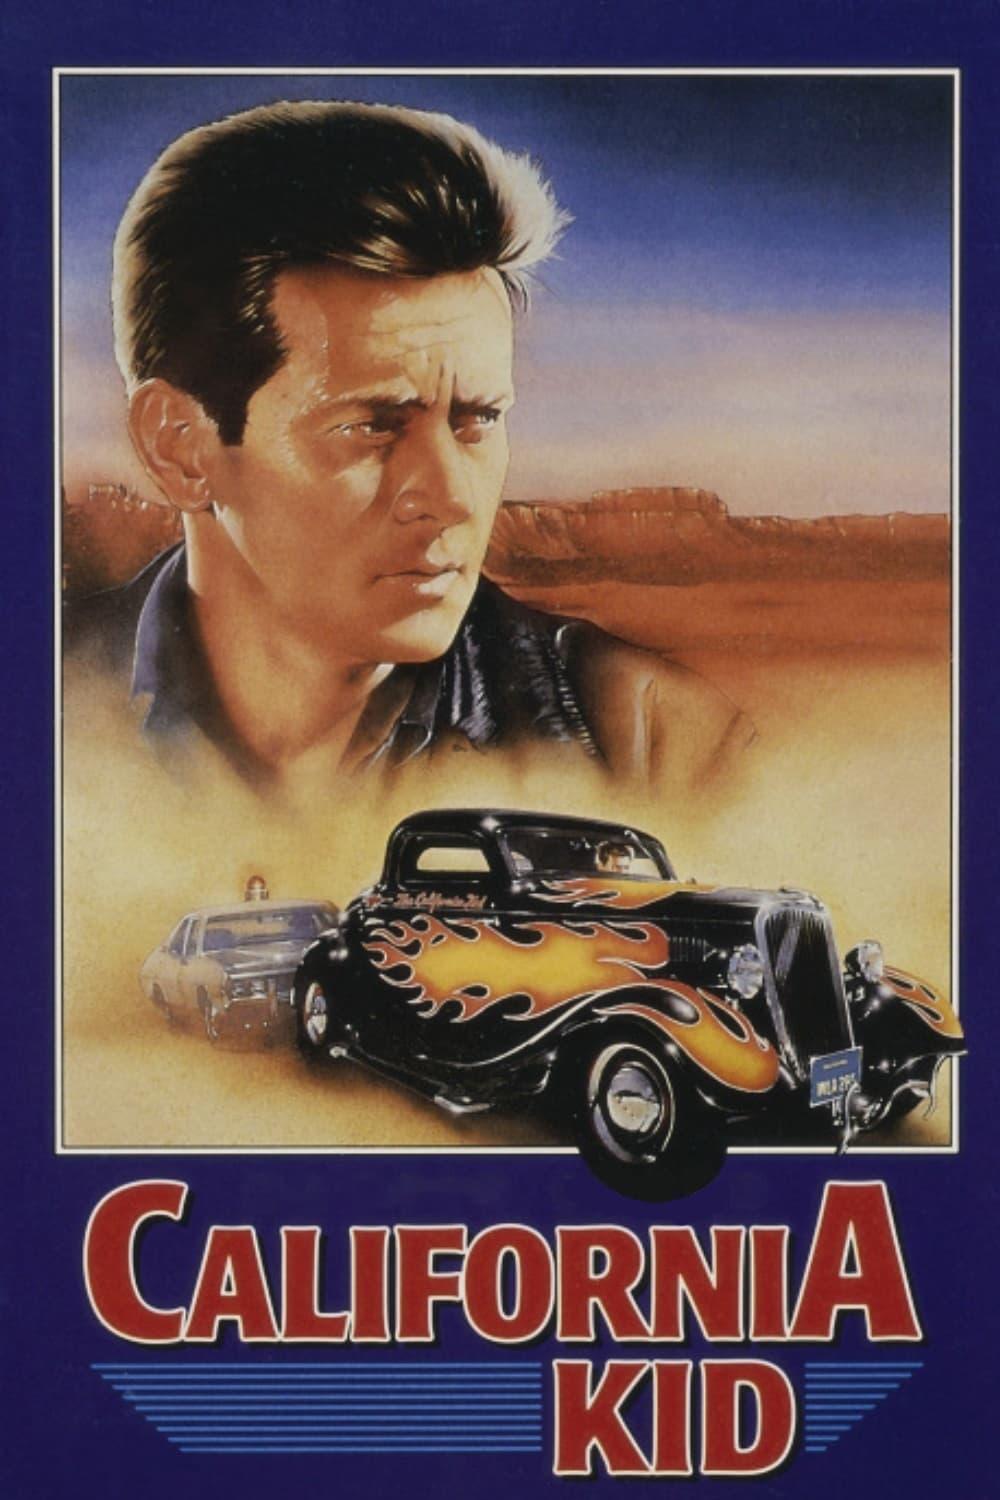 The California Kid poster